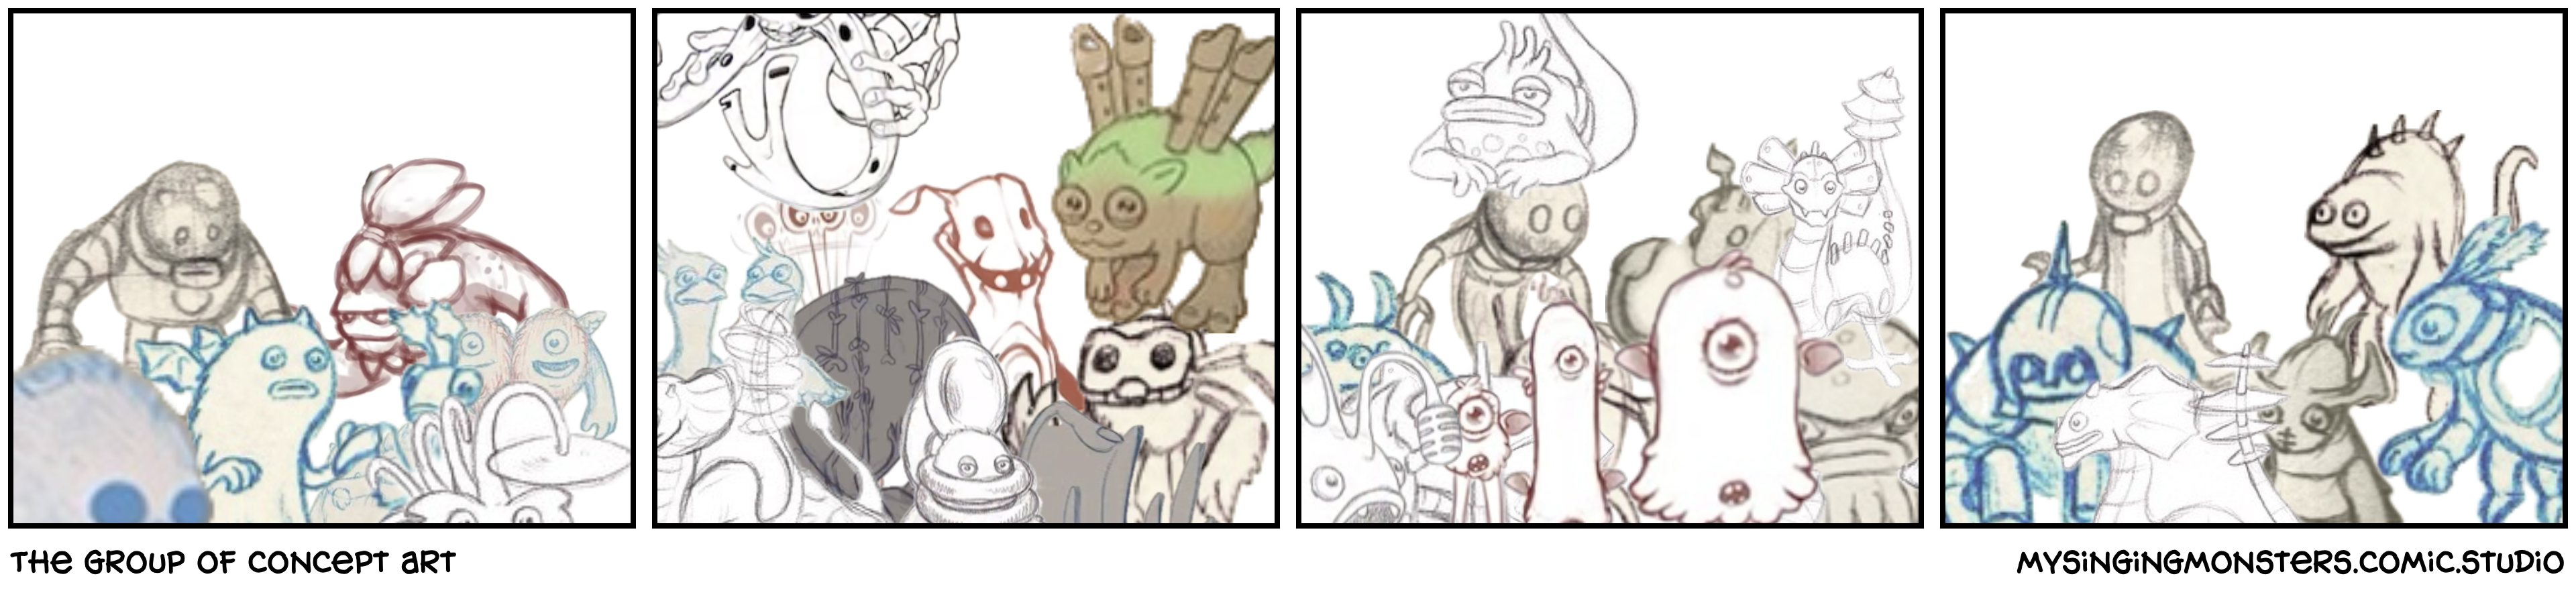 The group of concept art